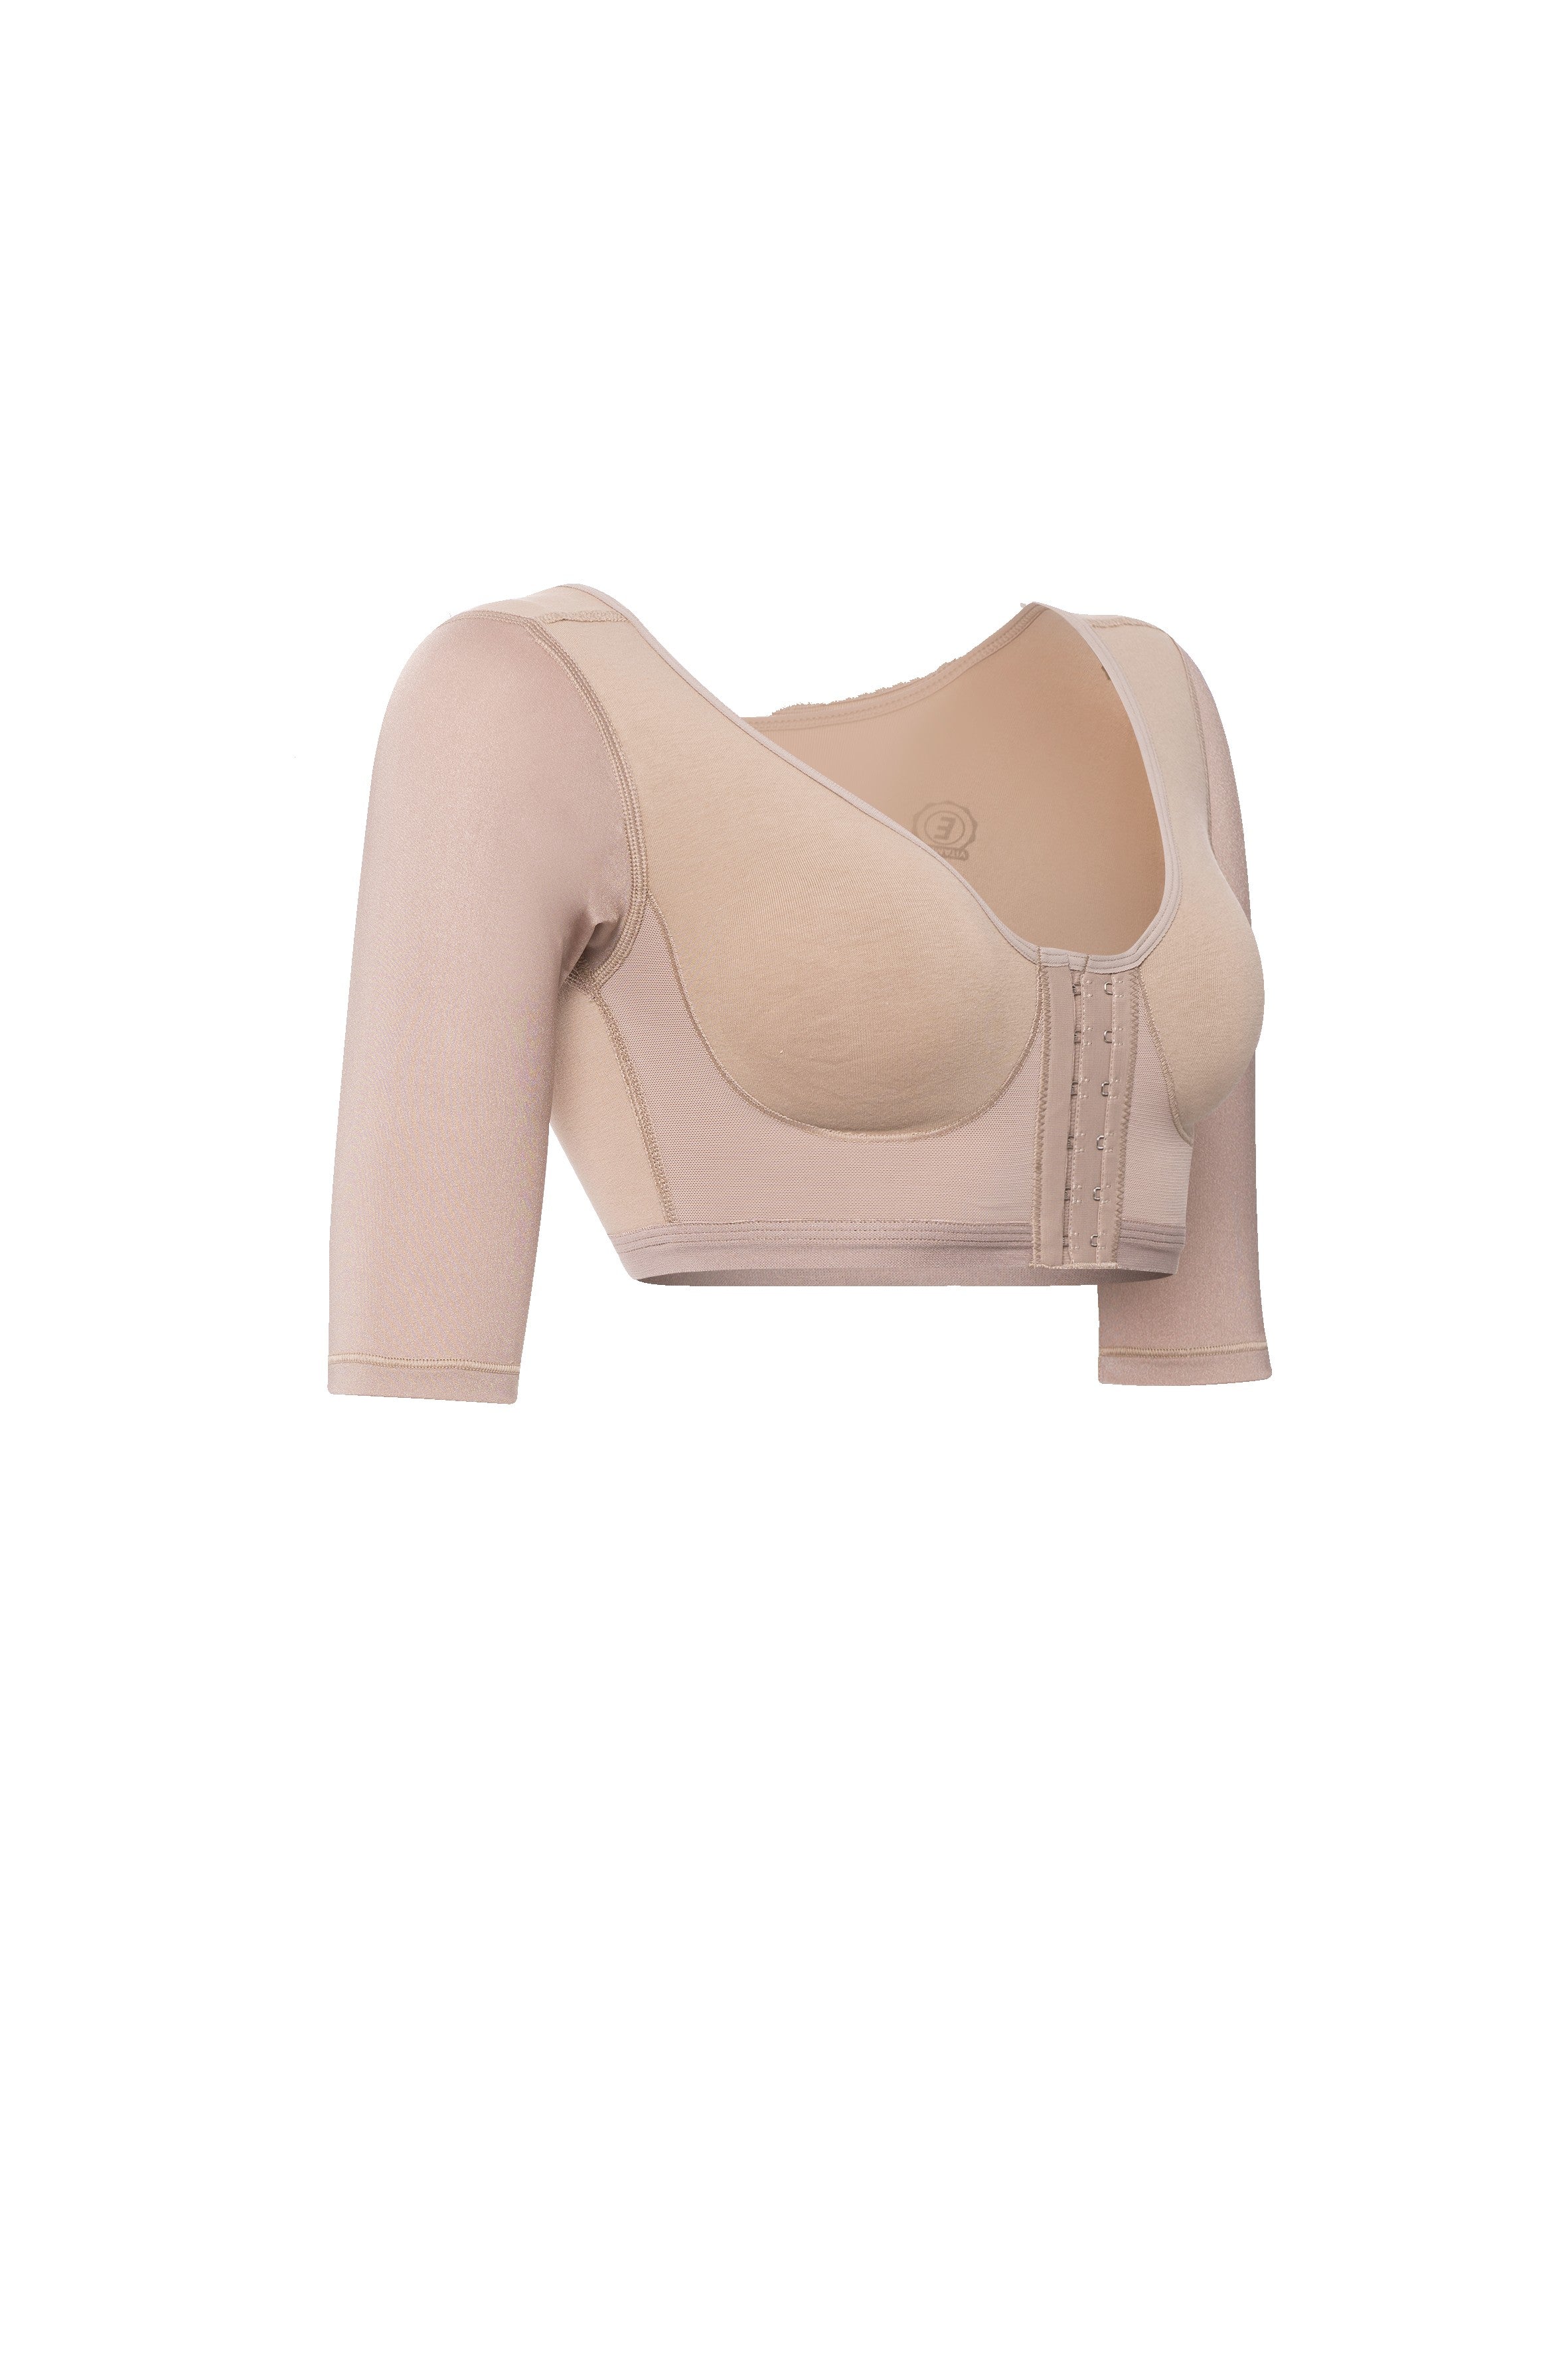 FTC Colombian Faja Wide Strip Bra for Daily and Post Surgical Use